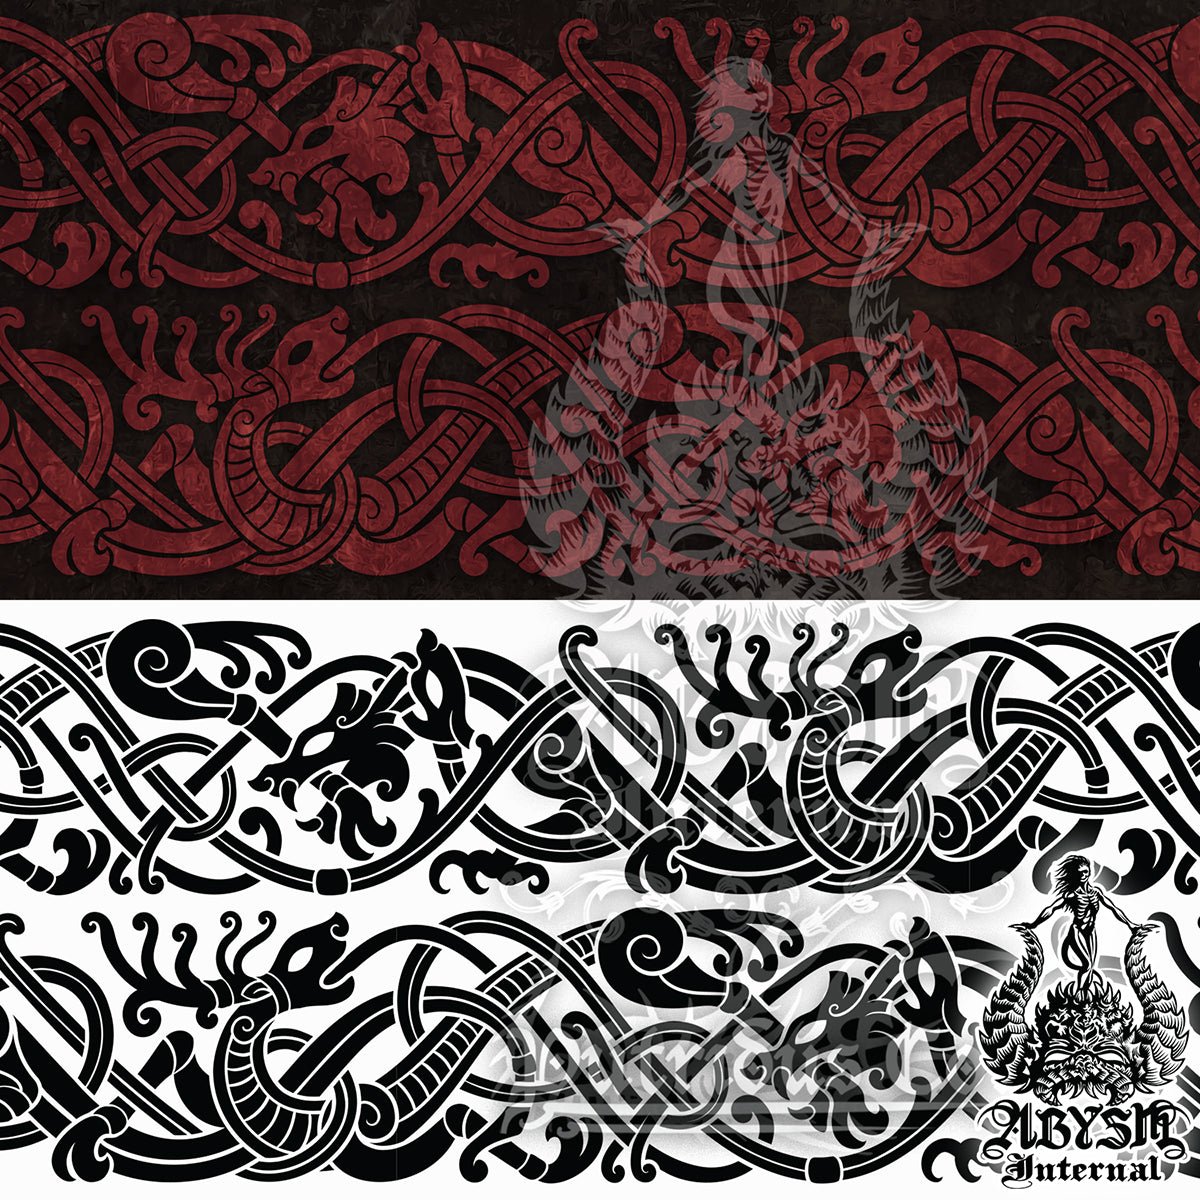 Norse Seamless pattern, Custom knotwork, Viking art for merch, books, music covers, tattoos, poster events, UI Graphic Design